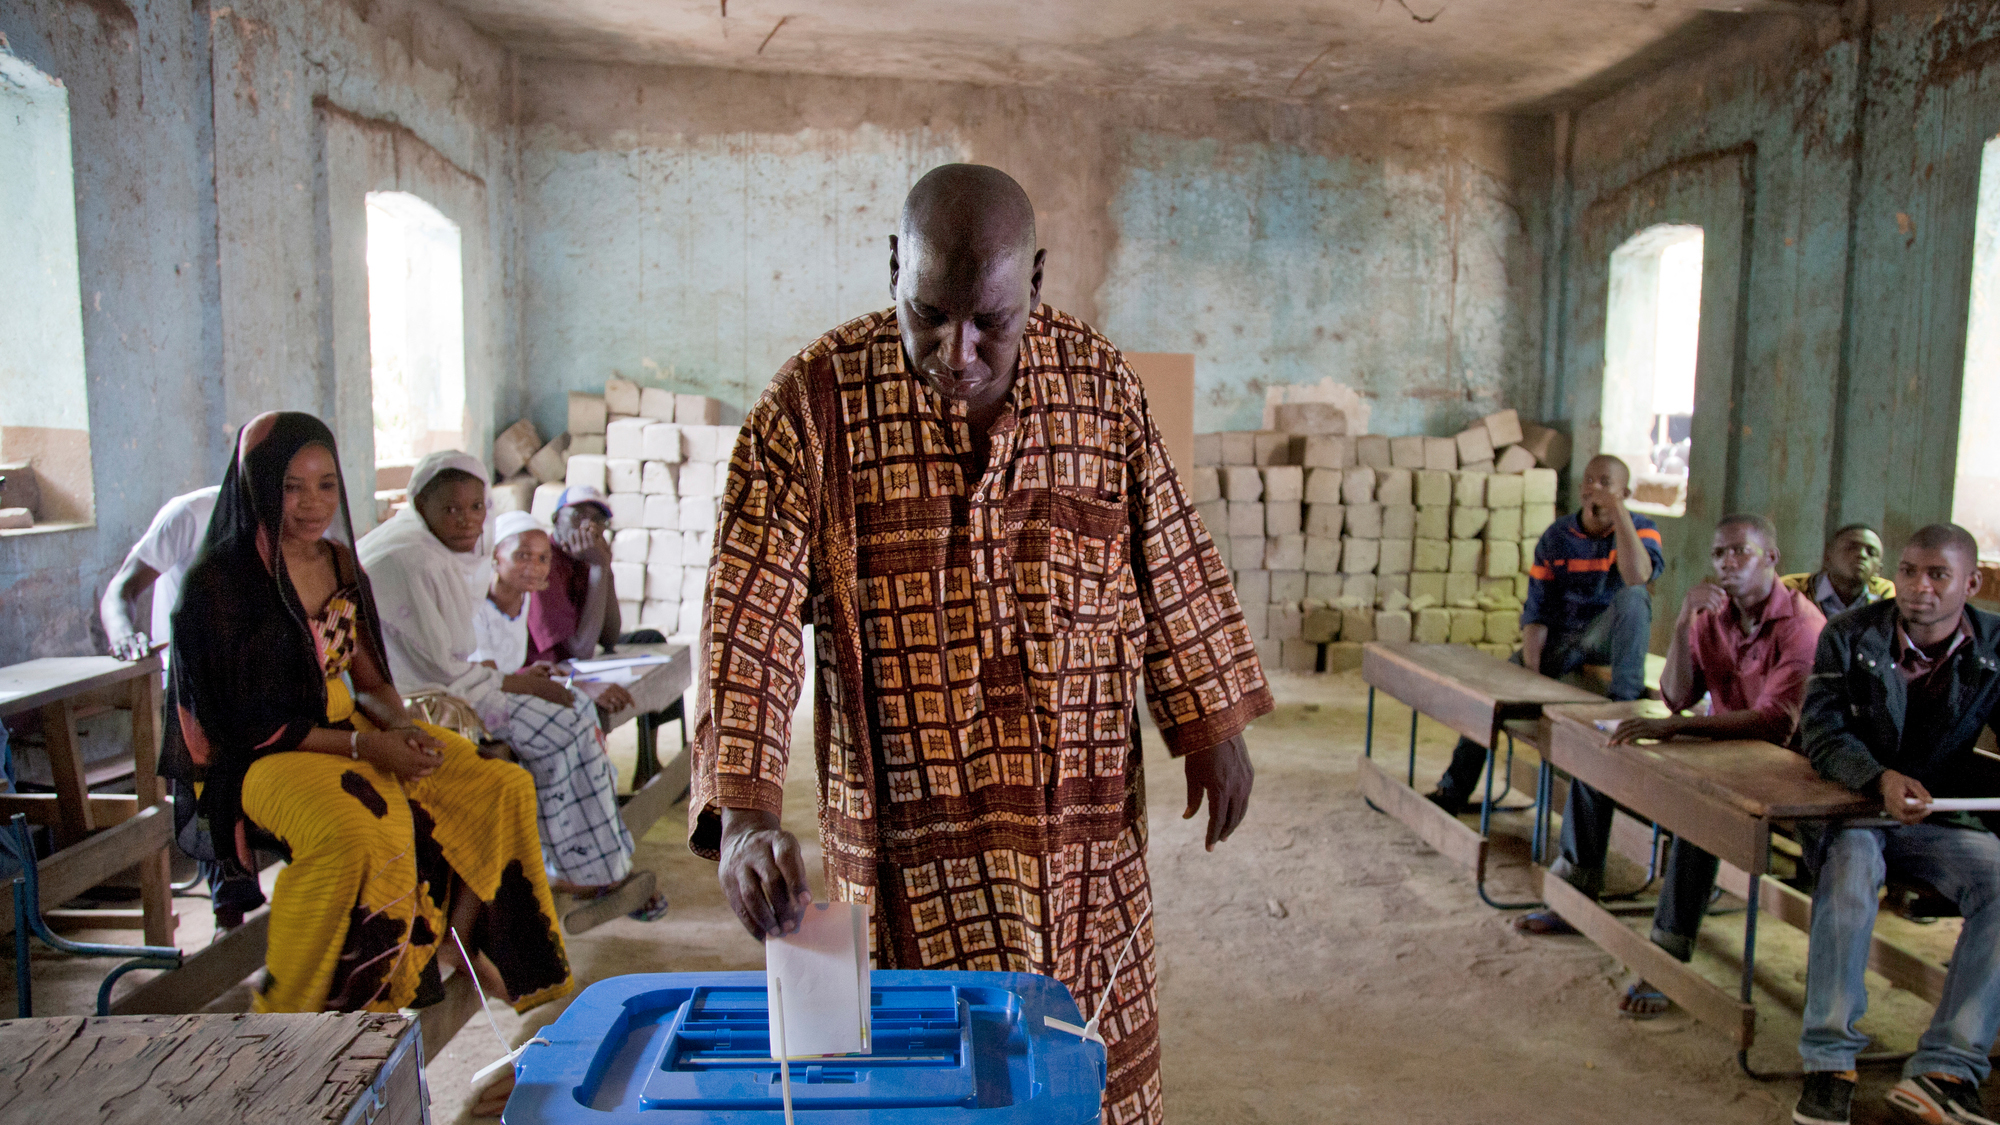 A man voting at a polling station in Mali in 2013.